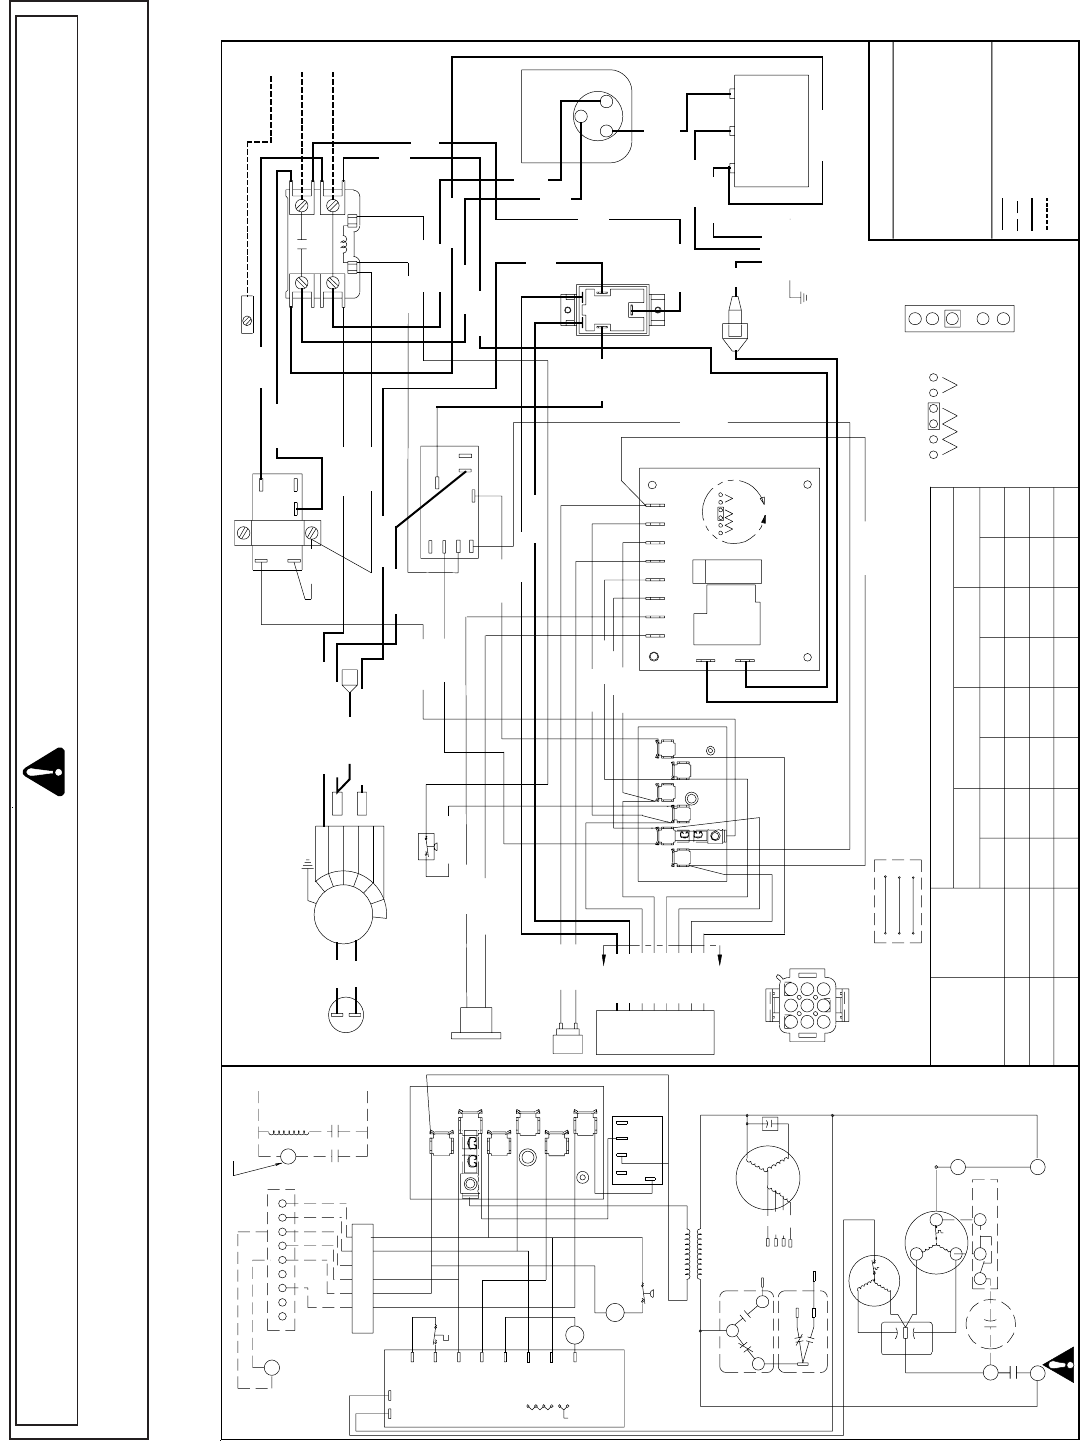 Amana Heat Pump Wiring Diagram : 2 : This is necessary to defrost the